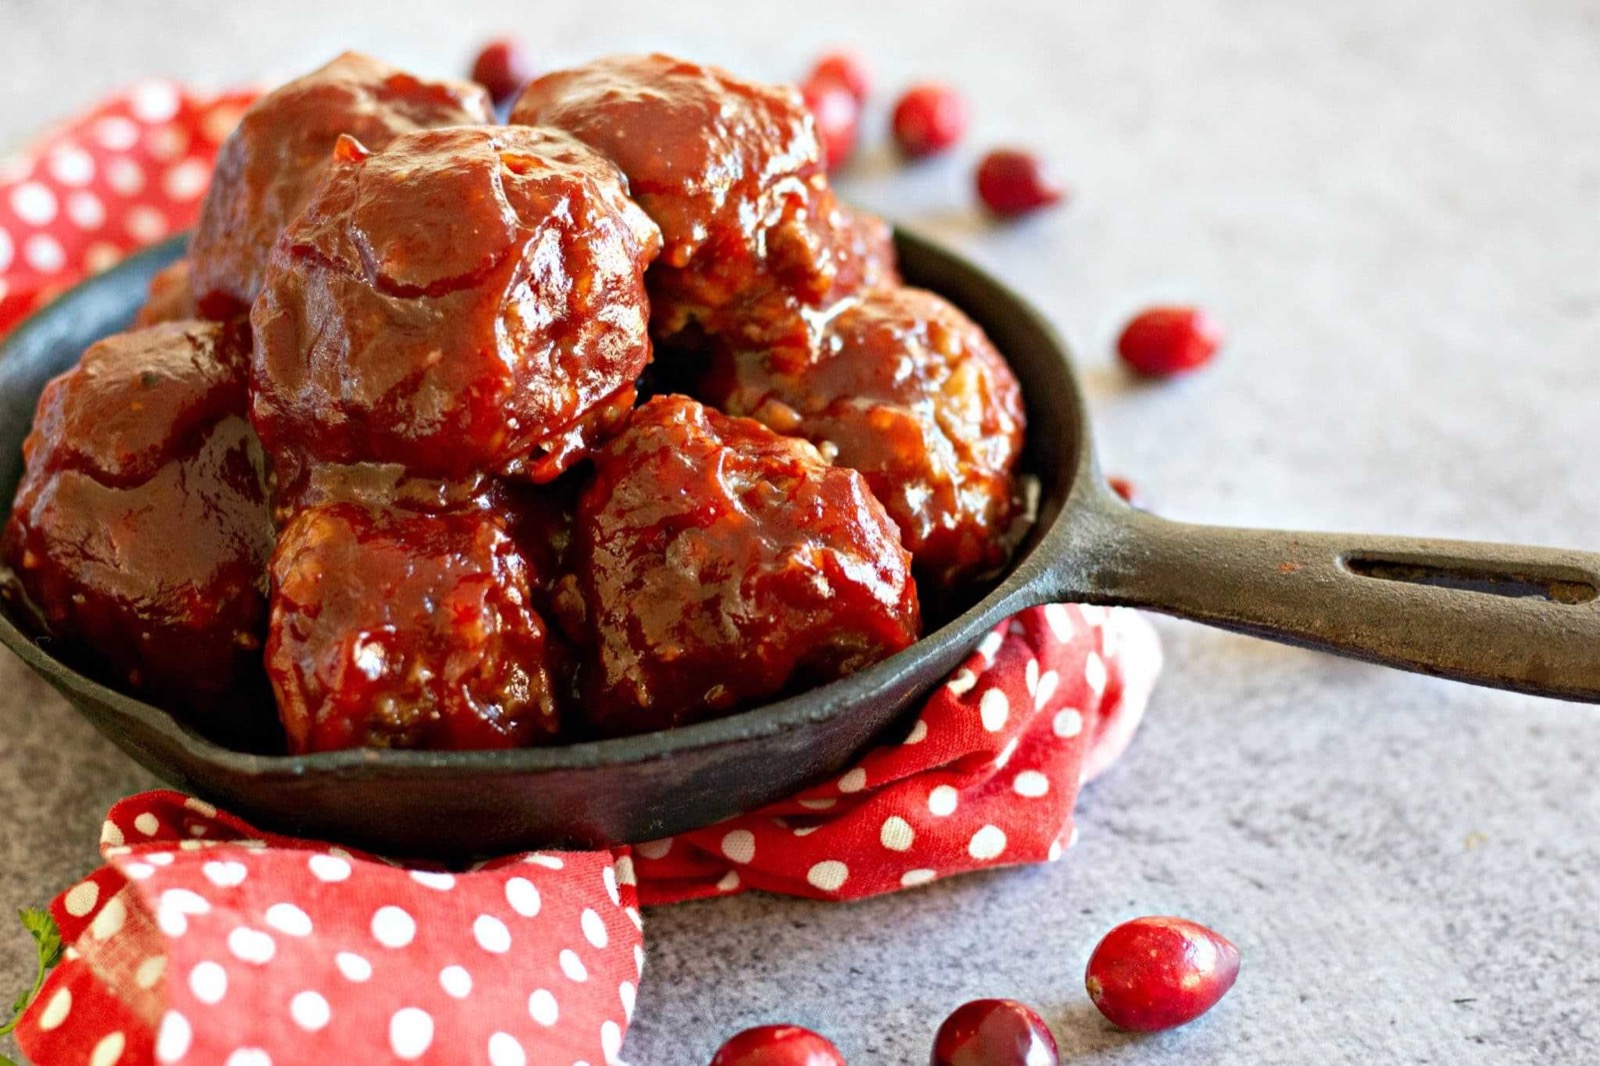 Grab Some Food at This All-Day Buffet to Find Out What People Secretly Dislike About You Meatballs With Cranberry Sauce